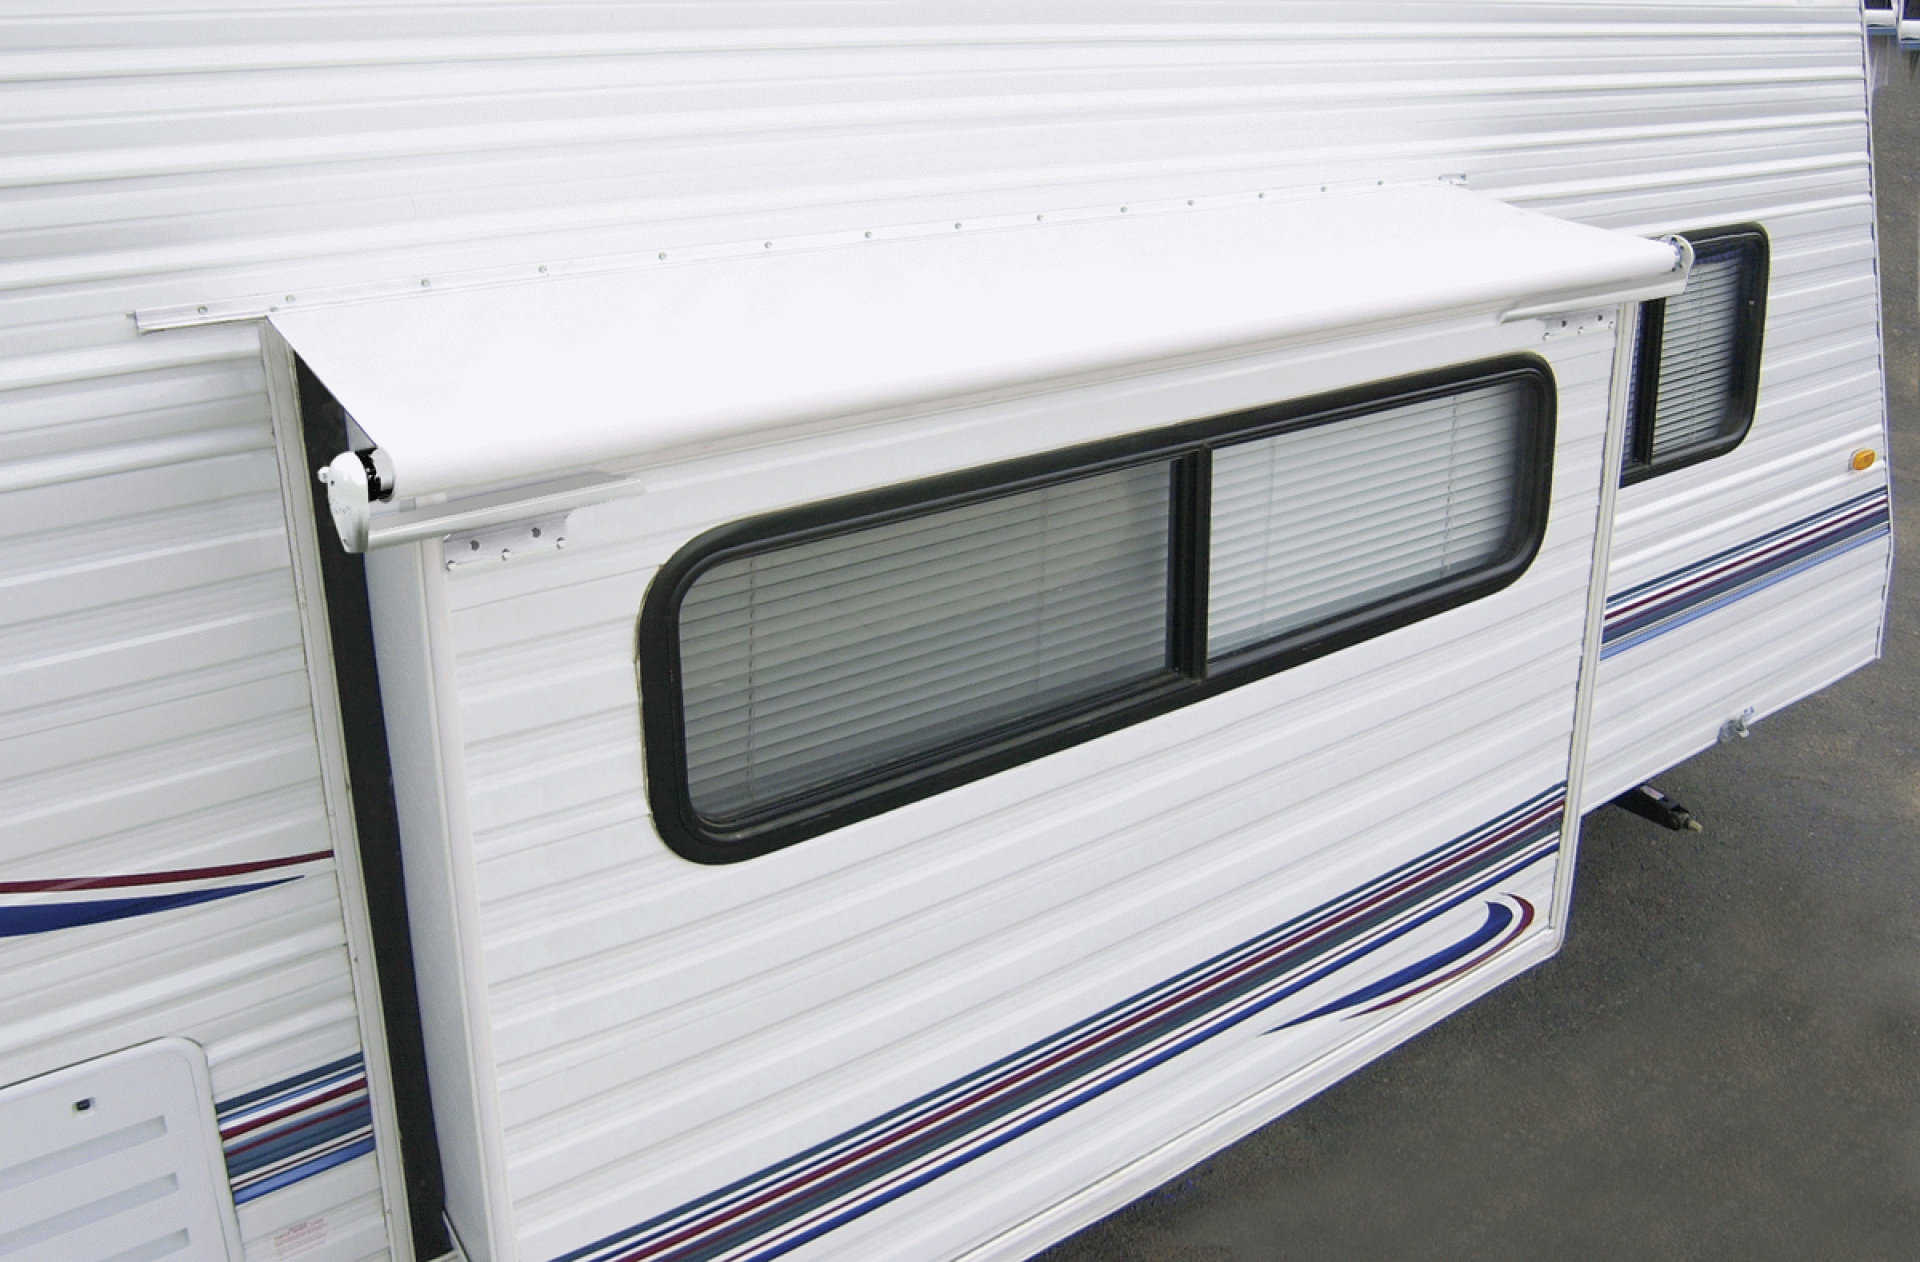 CAREFREE OF COLORADO | UQ0610025 | SIDEOUT KOVER III AWNING 54" - 61" ROOF RANGE WHITE VINYL FABRIC & DEFLECTOR